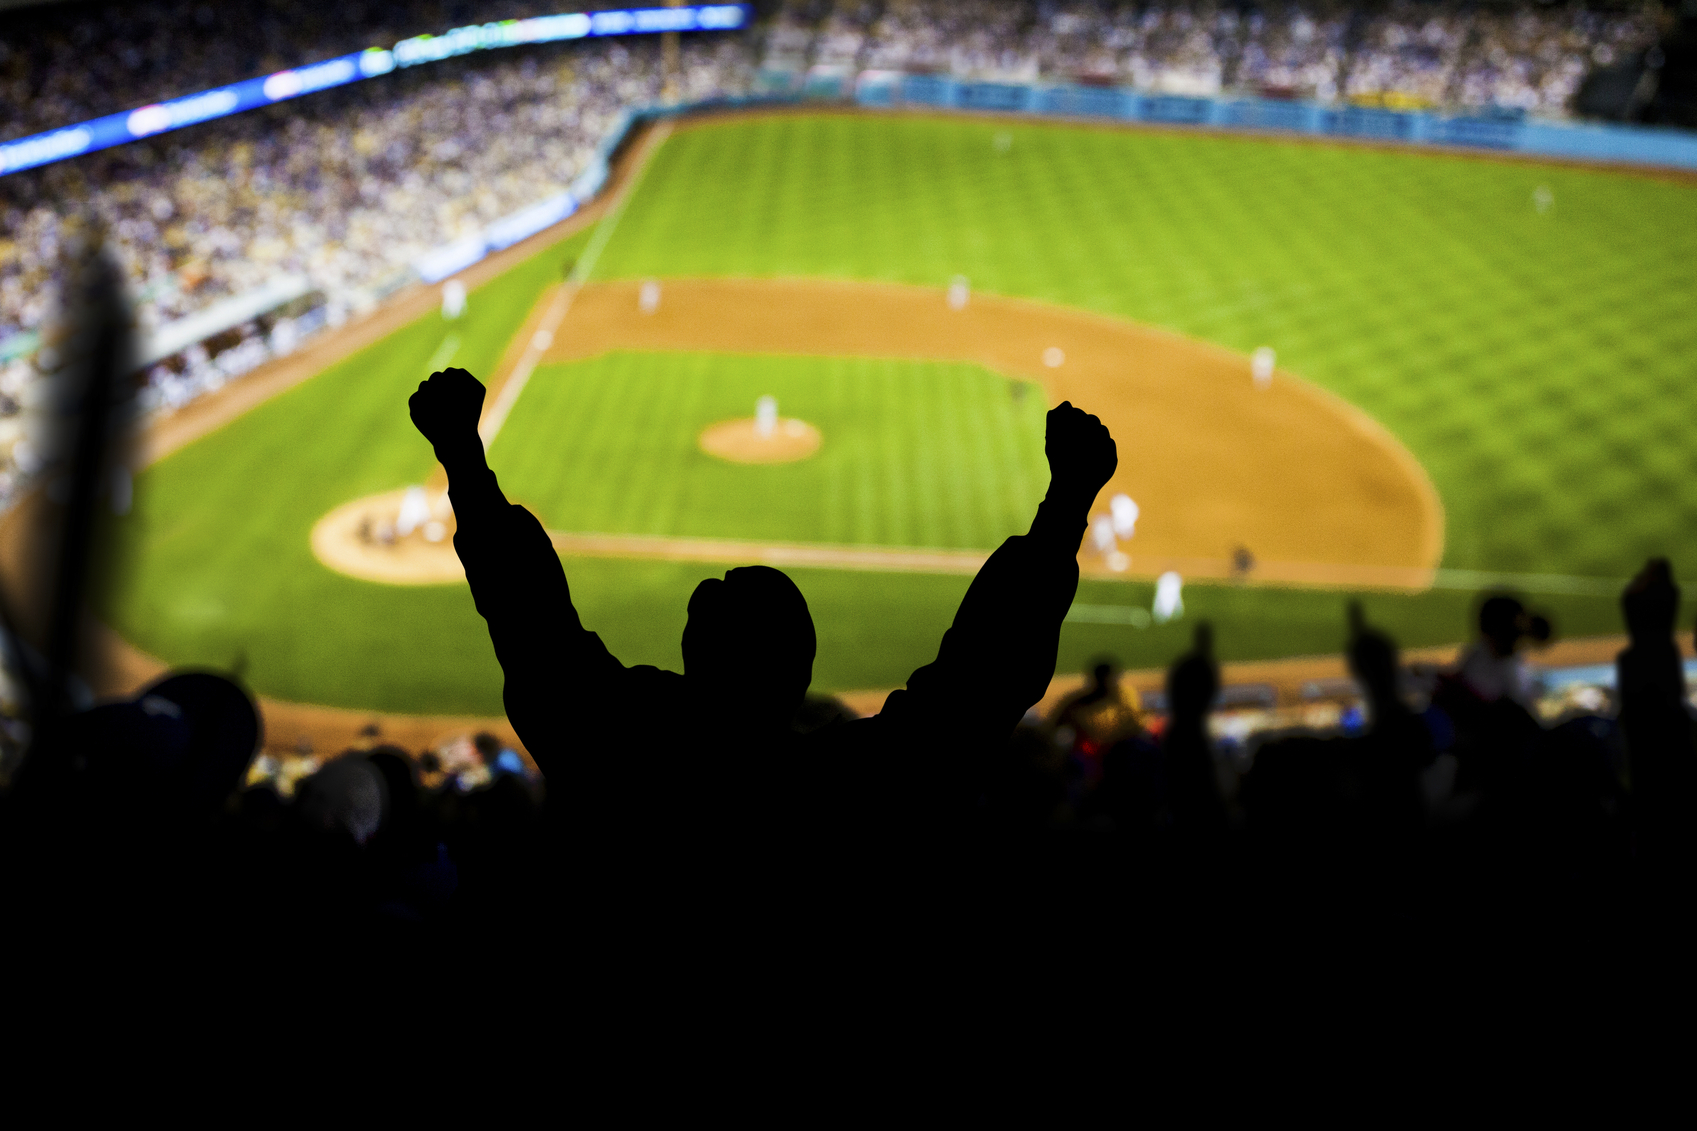 Fans raise their hands in excitement at a baseball game.